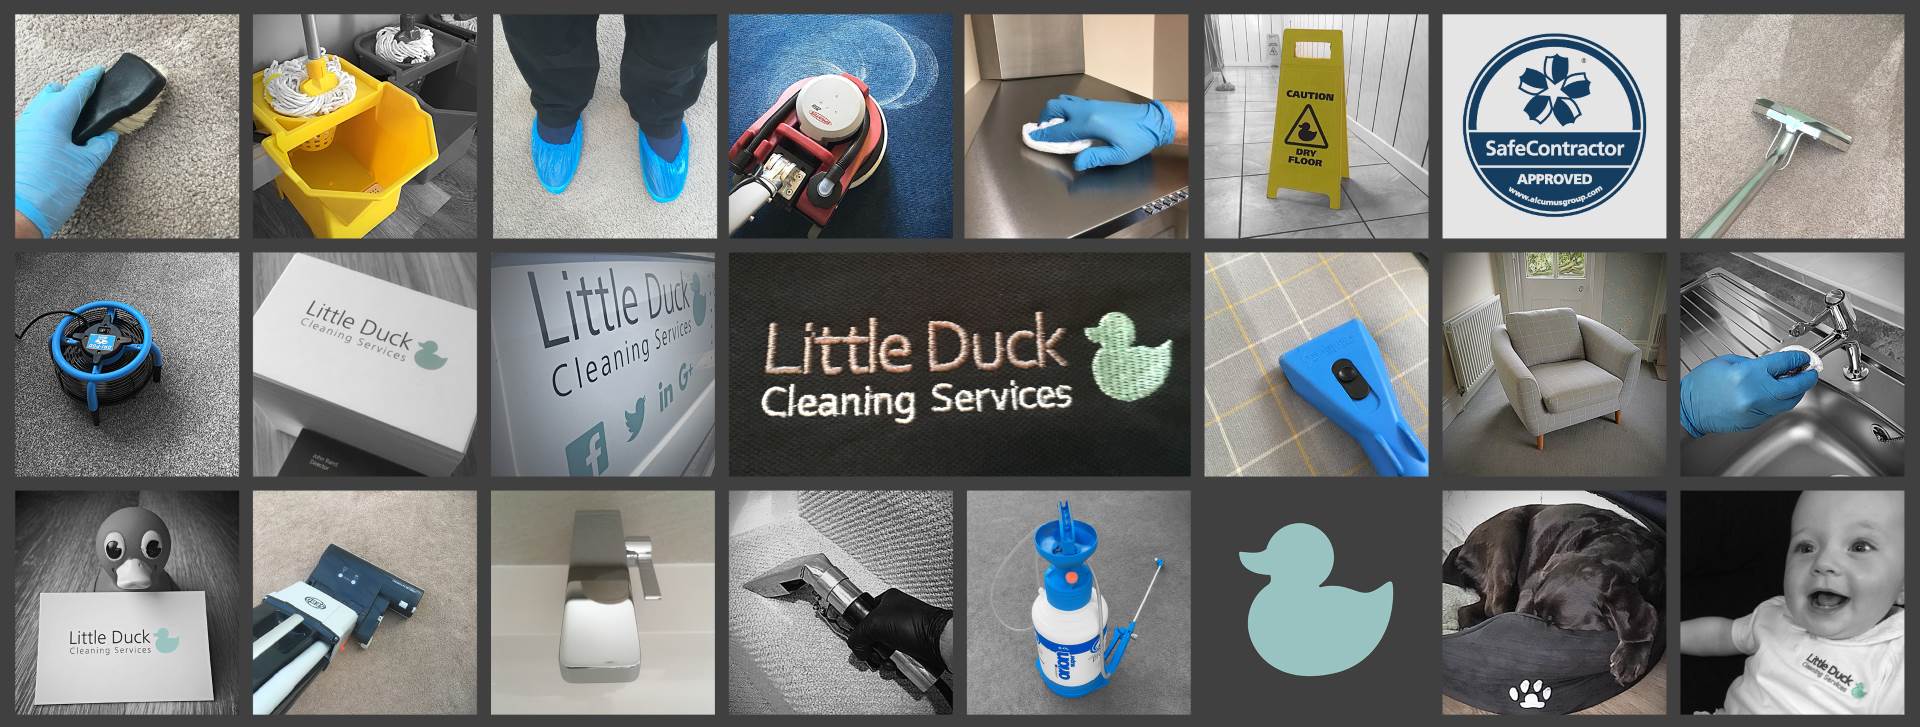 Little Duck Cleaning Services Limited provide a wide range of domestic and commercial cleaning services and contracts to homes and commercial premises across Cumbria and the Borders